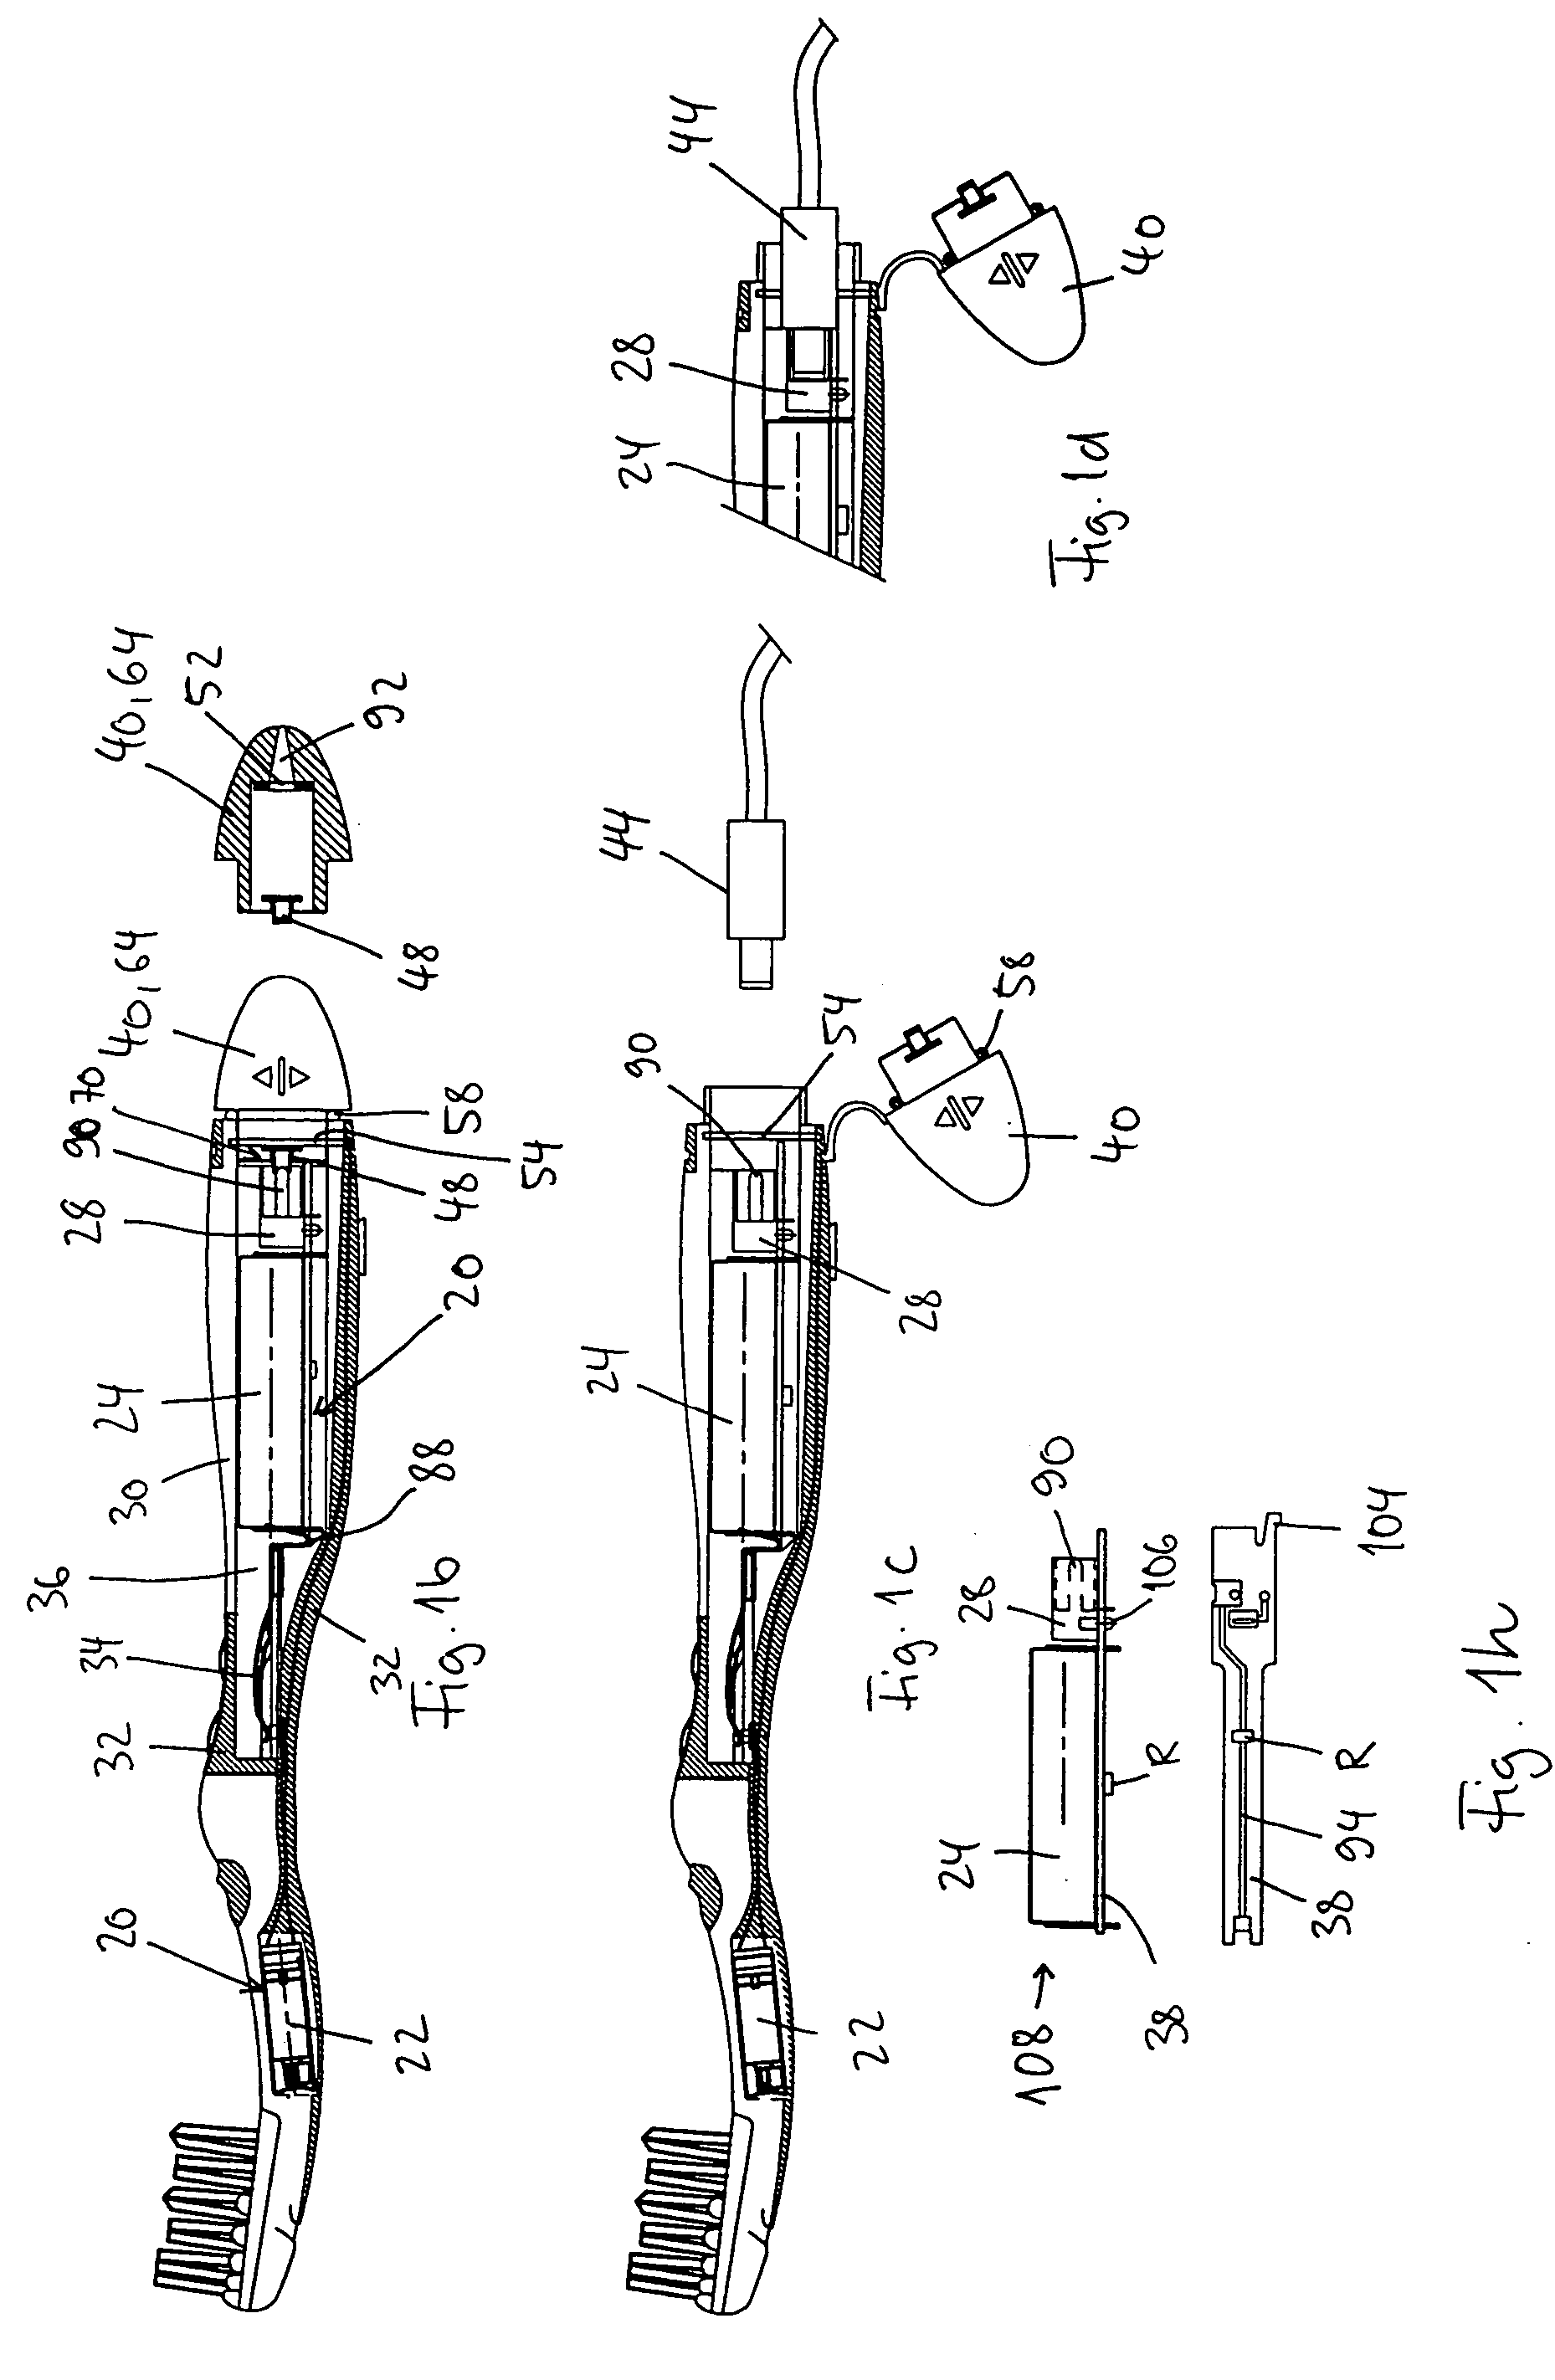 Rechargeable toothbrush having a sealed position and an open position for exposing a contact element for charging